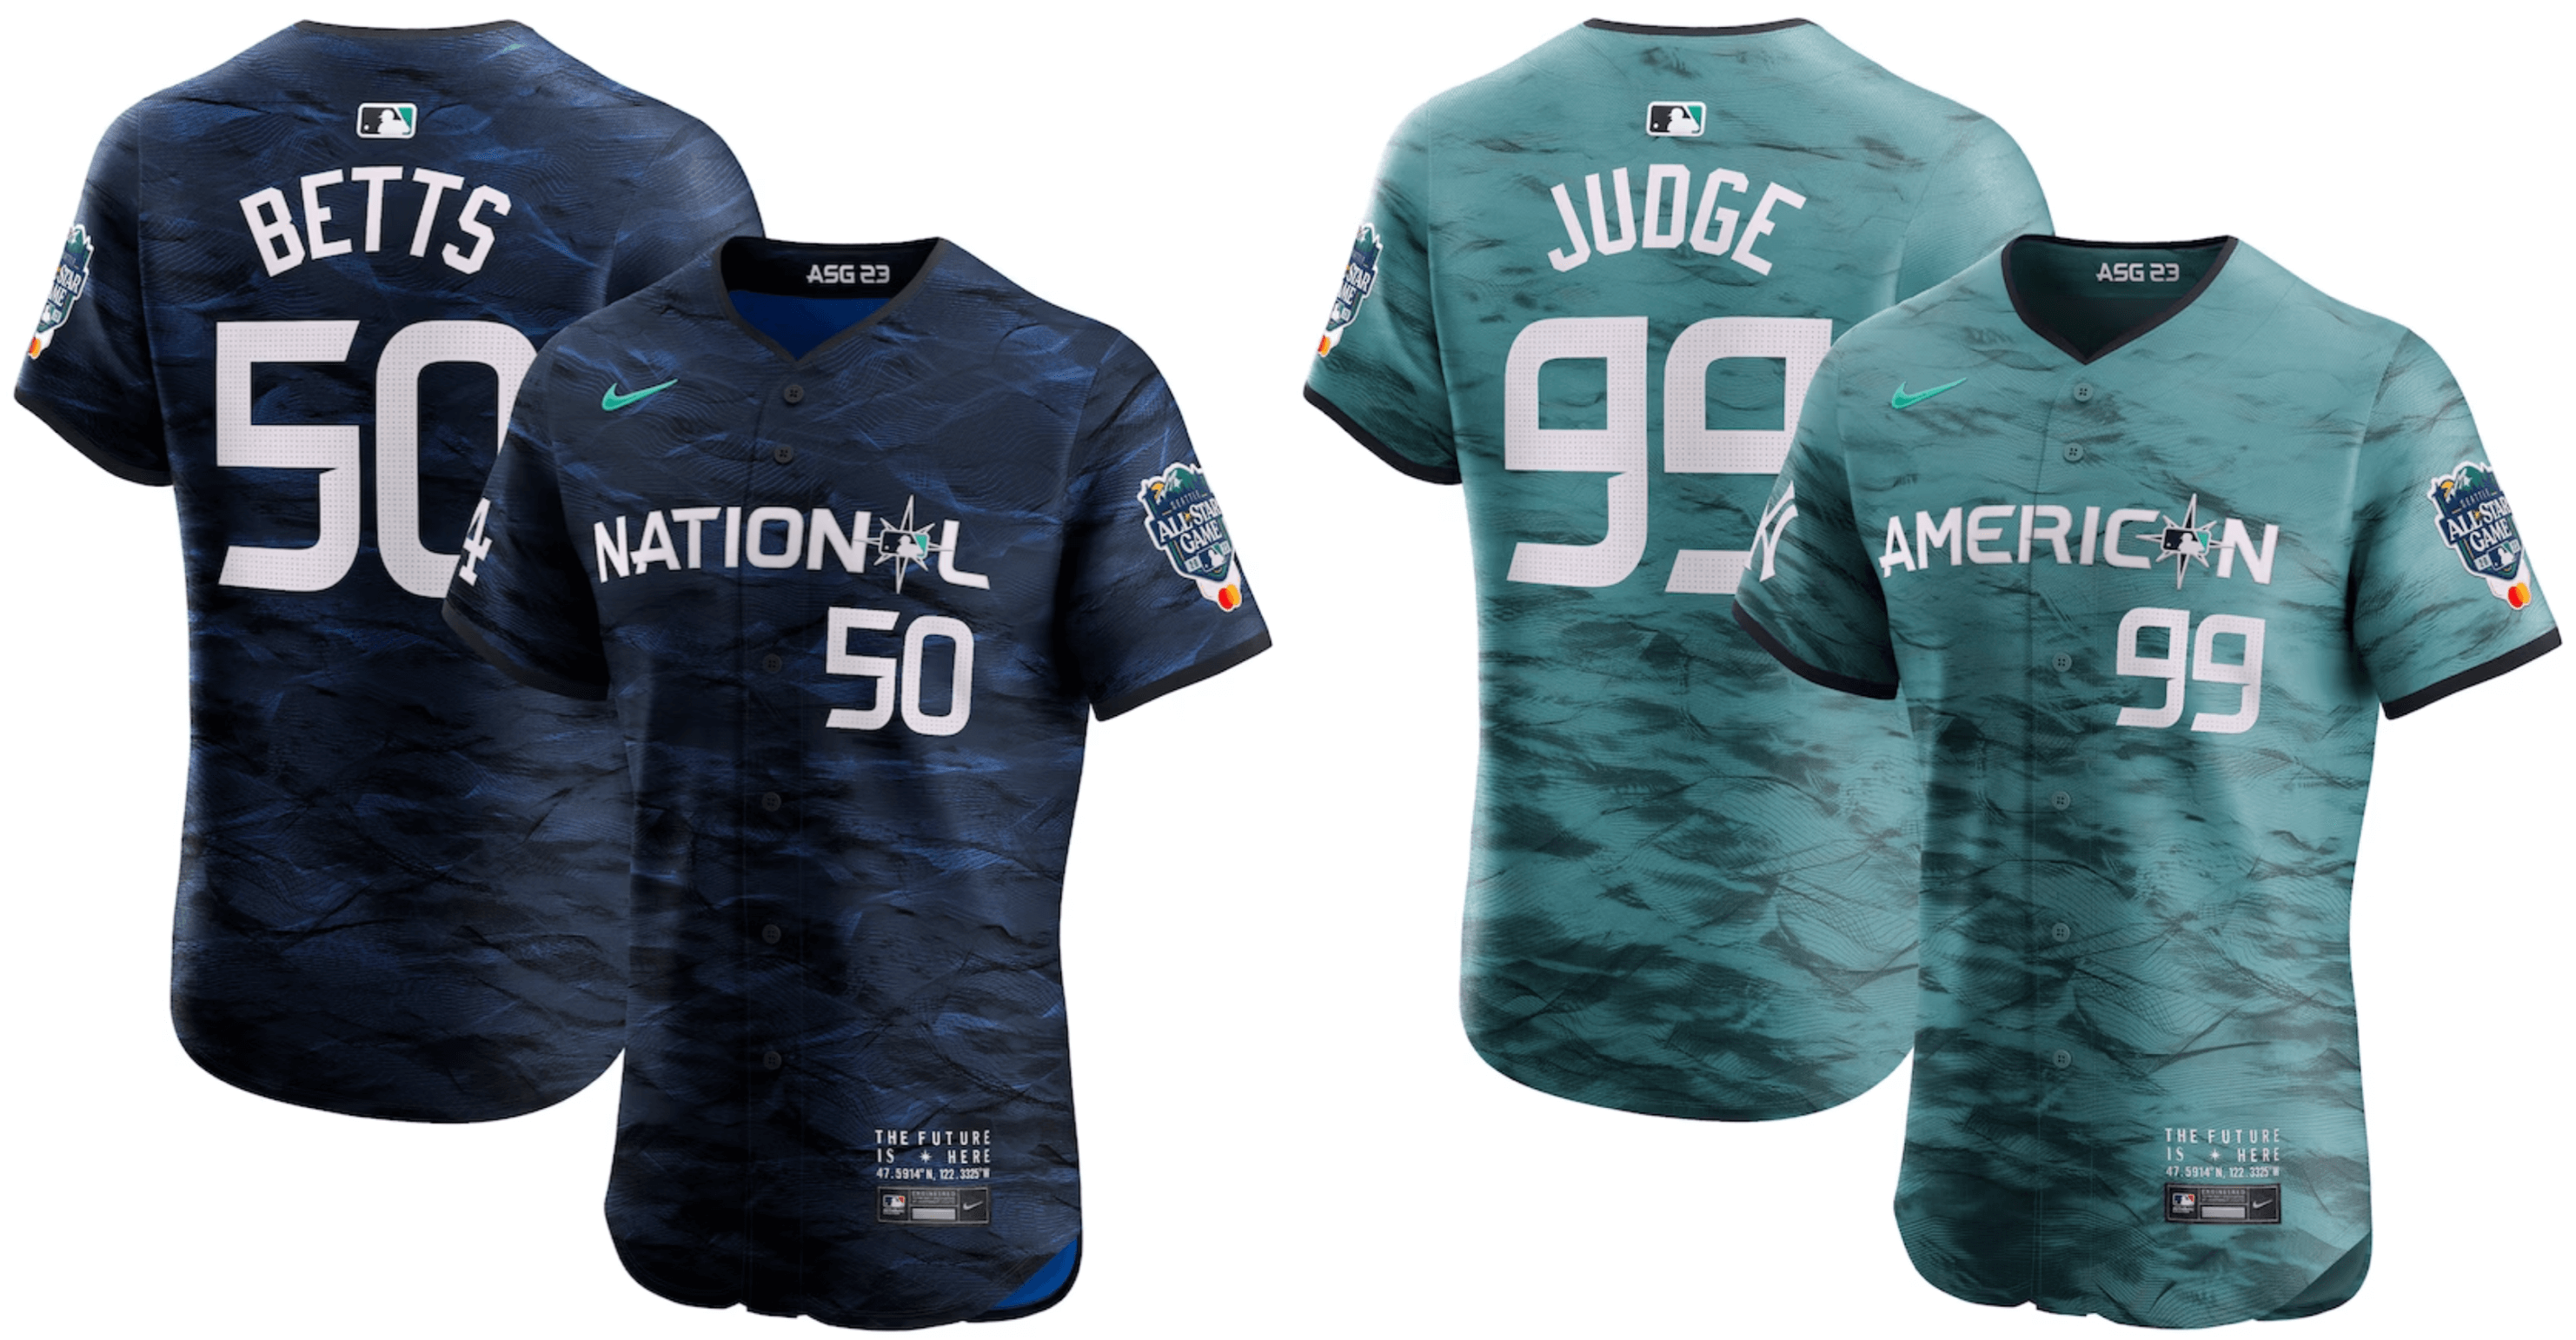 MLB Releases All-Star Game Jerseys in New Nike Template